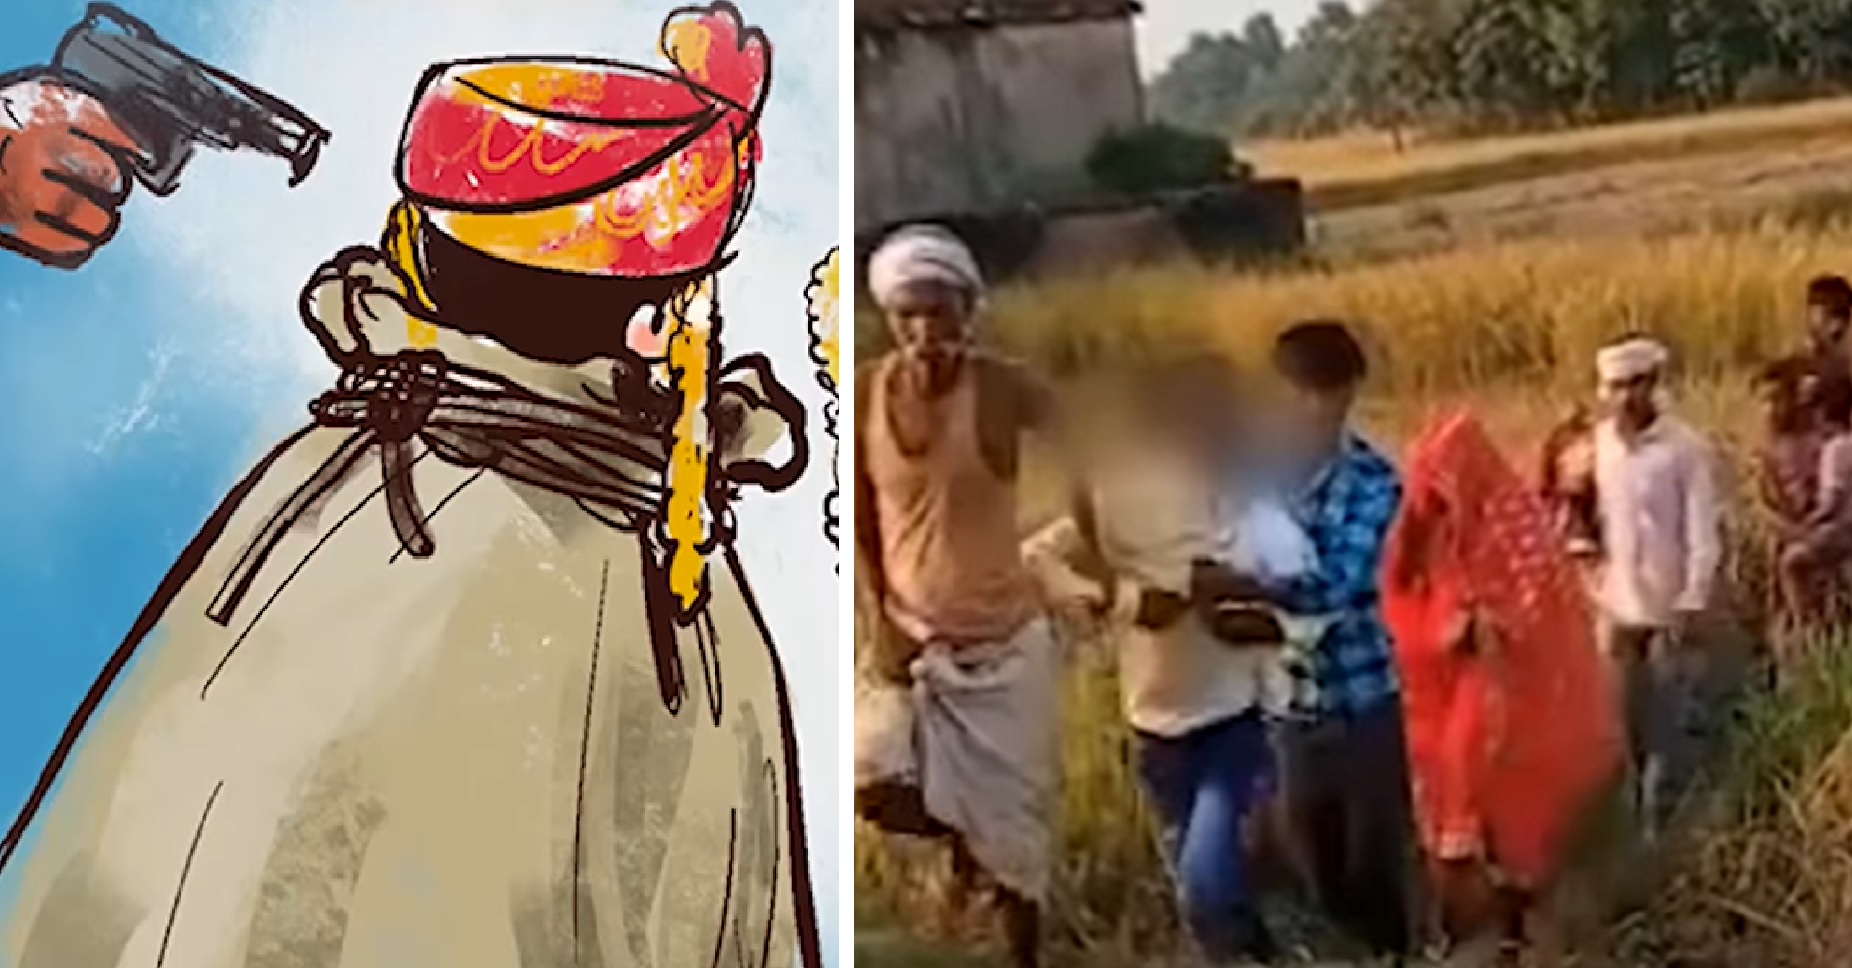 Pakadua Vivah: Video Captures Young Man Being Kidnapped In Bihar For ‘Forceful Marriage’